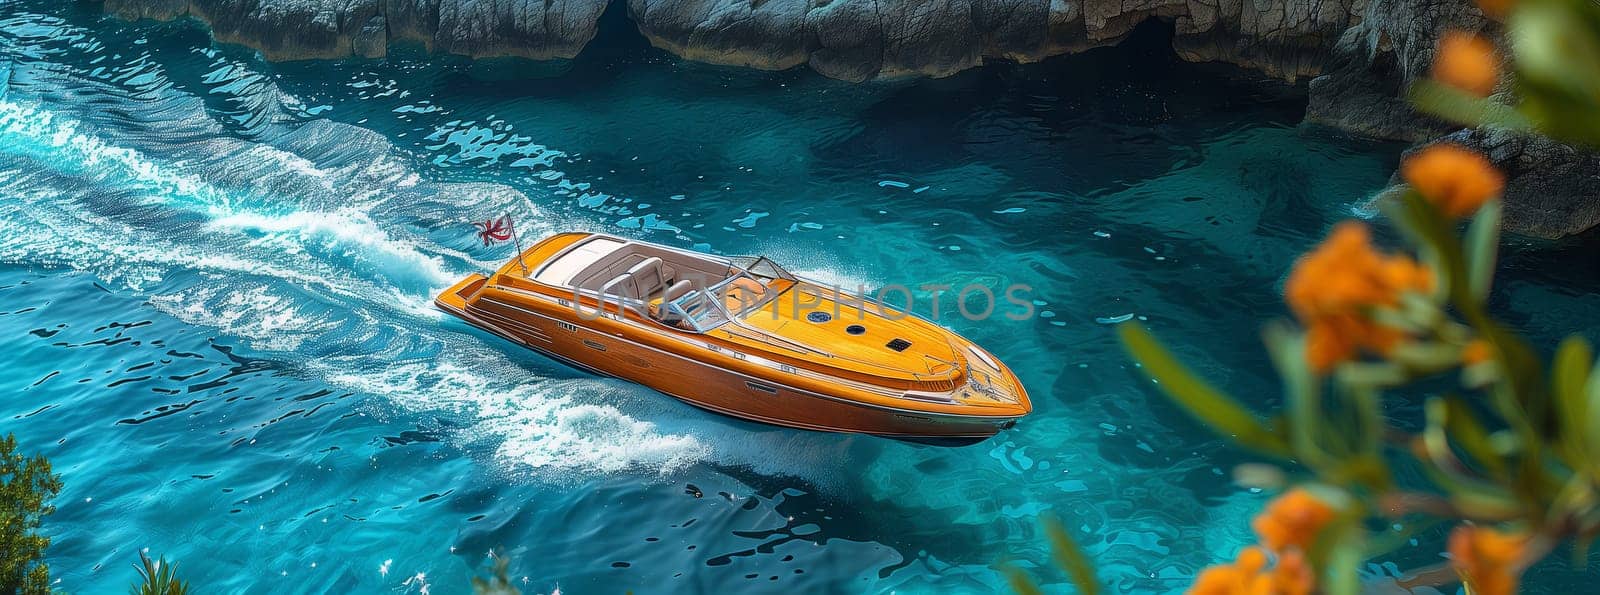 A yellow watercraft is gently floating on the shimmering liquid surface of a peaceful body of water, providing a tranquil scene in the natural landscape